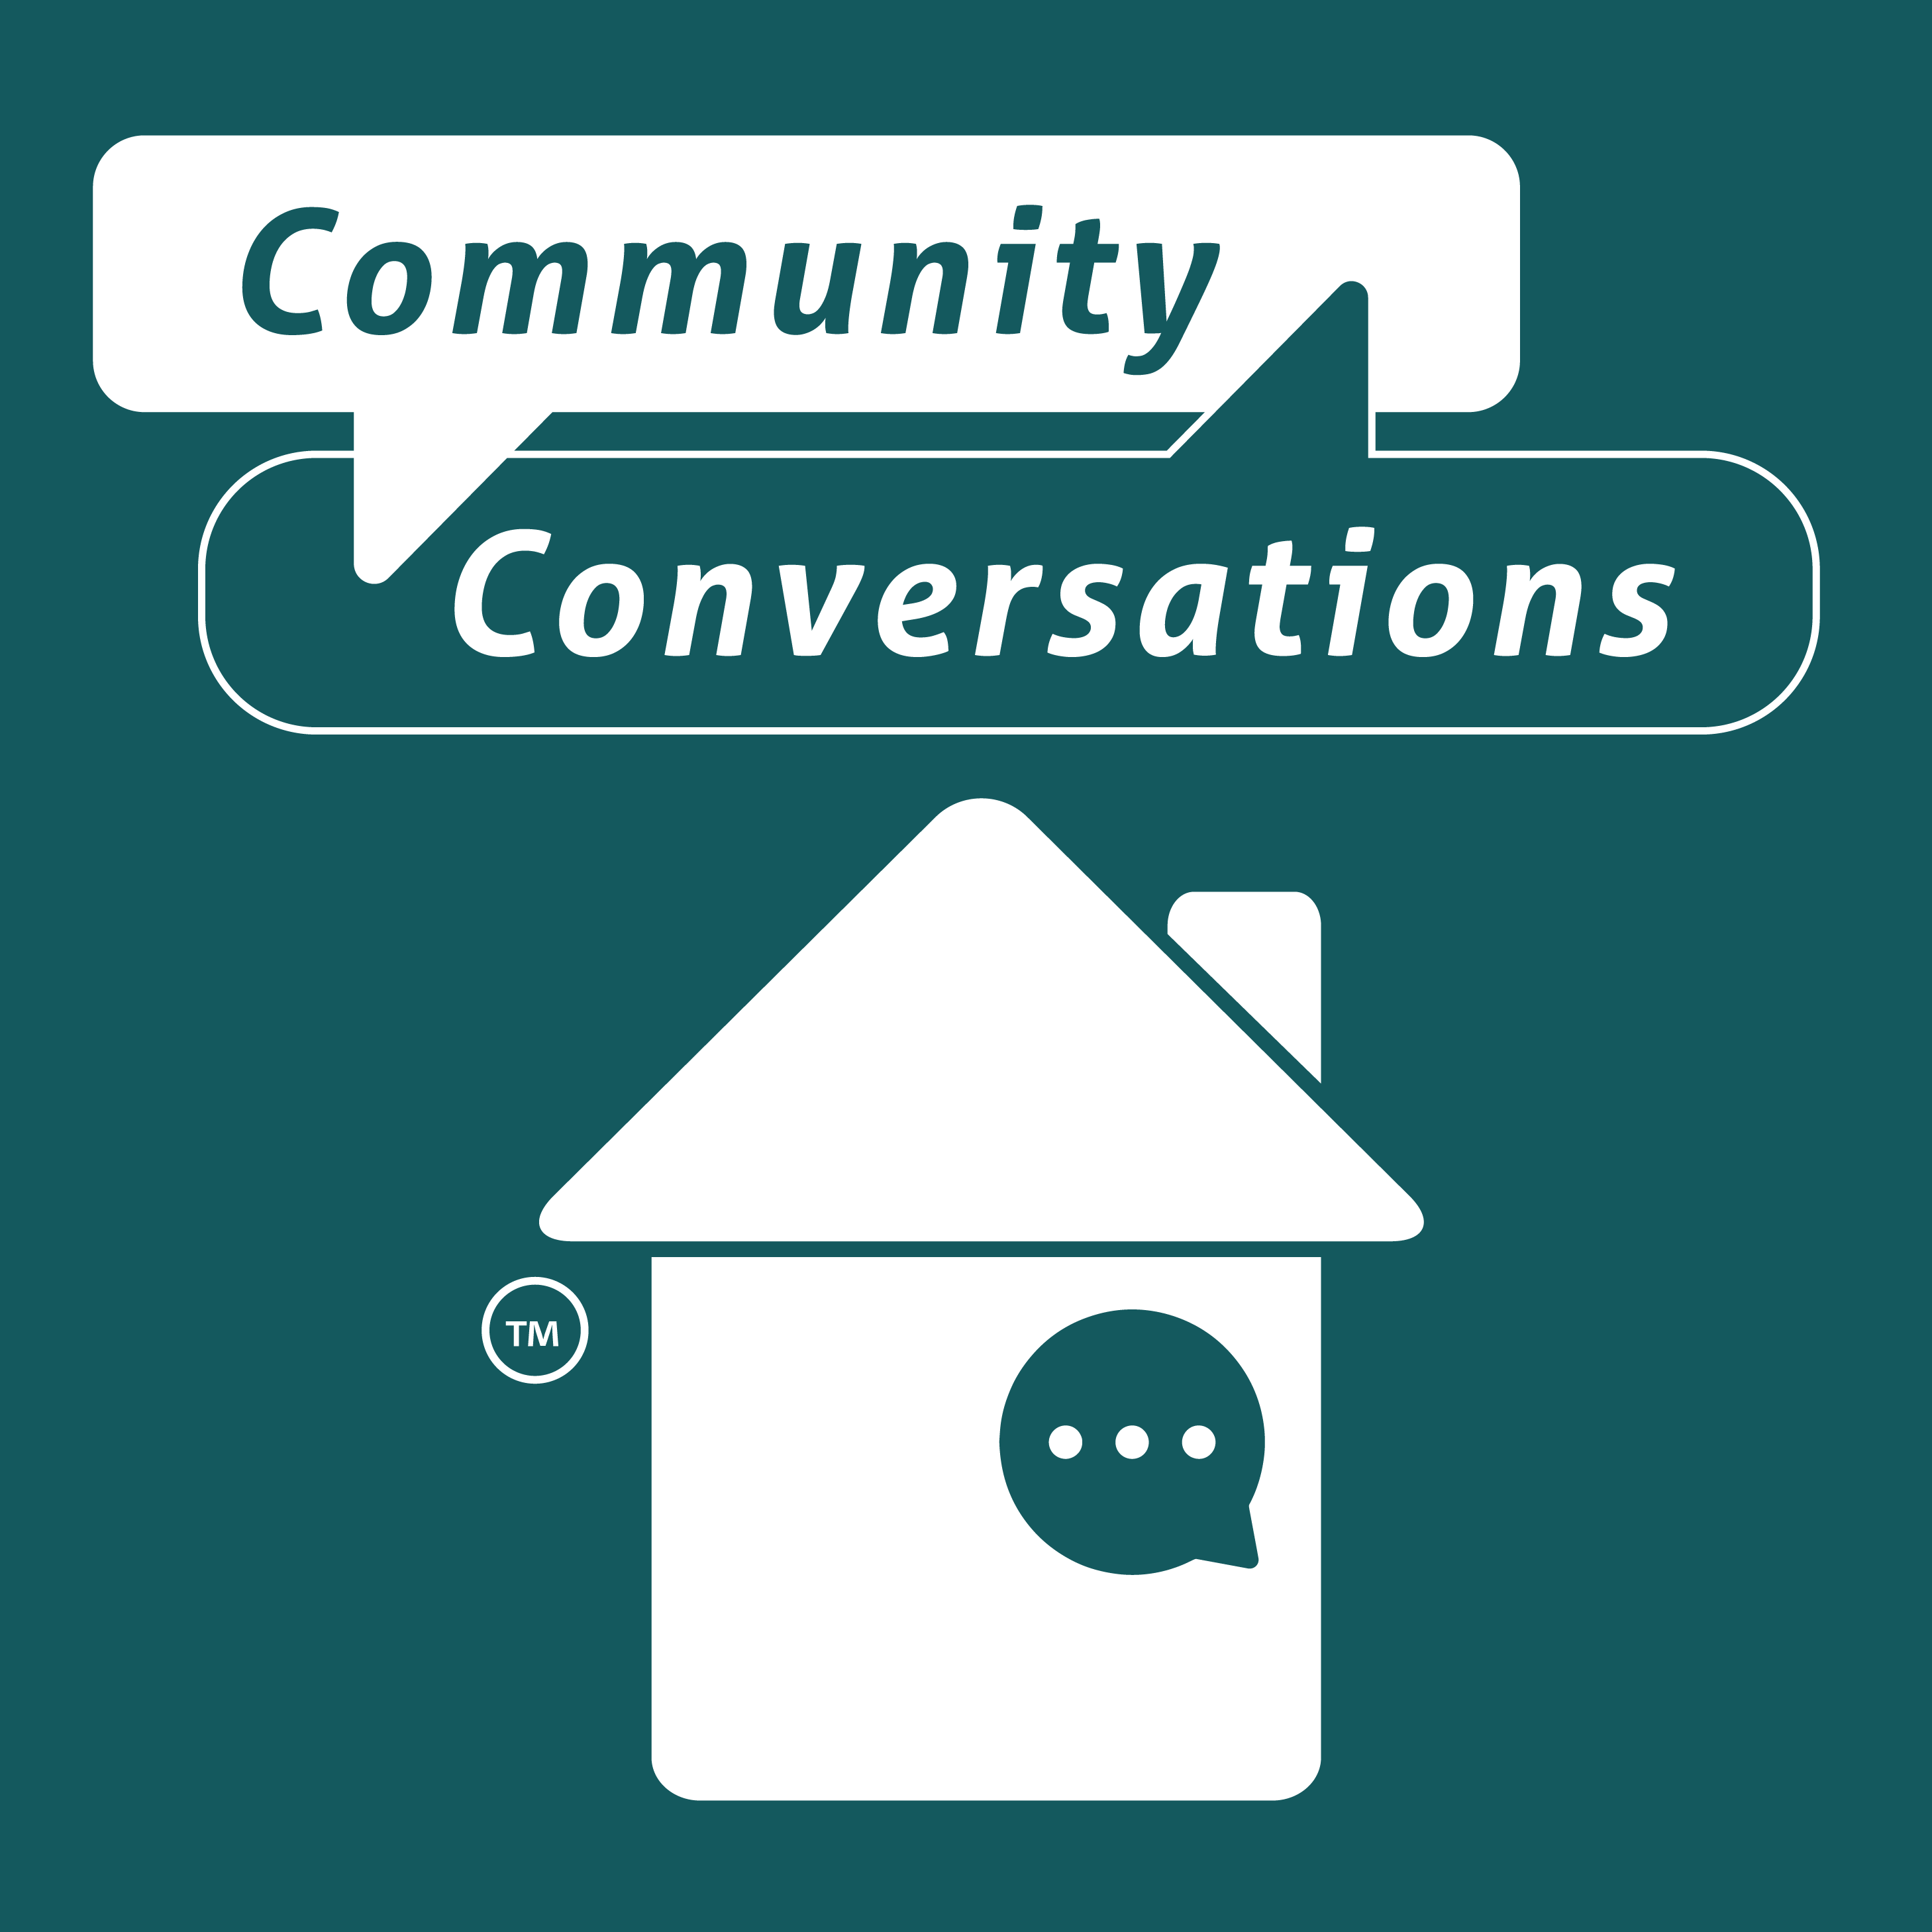 Developing Community Connections with Martin Walton